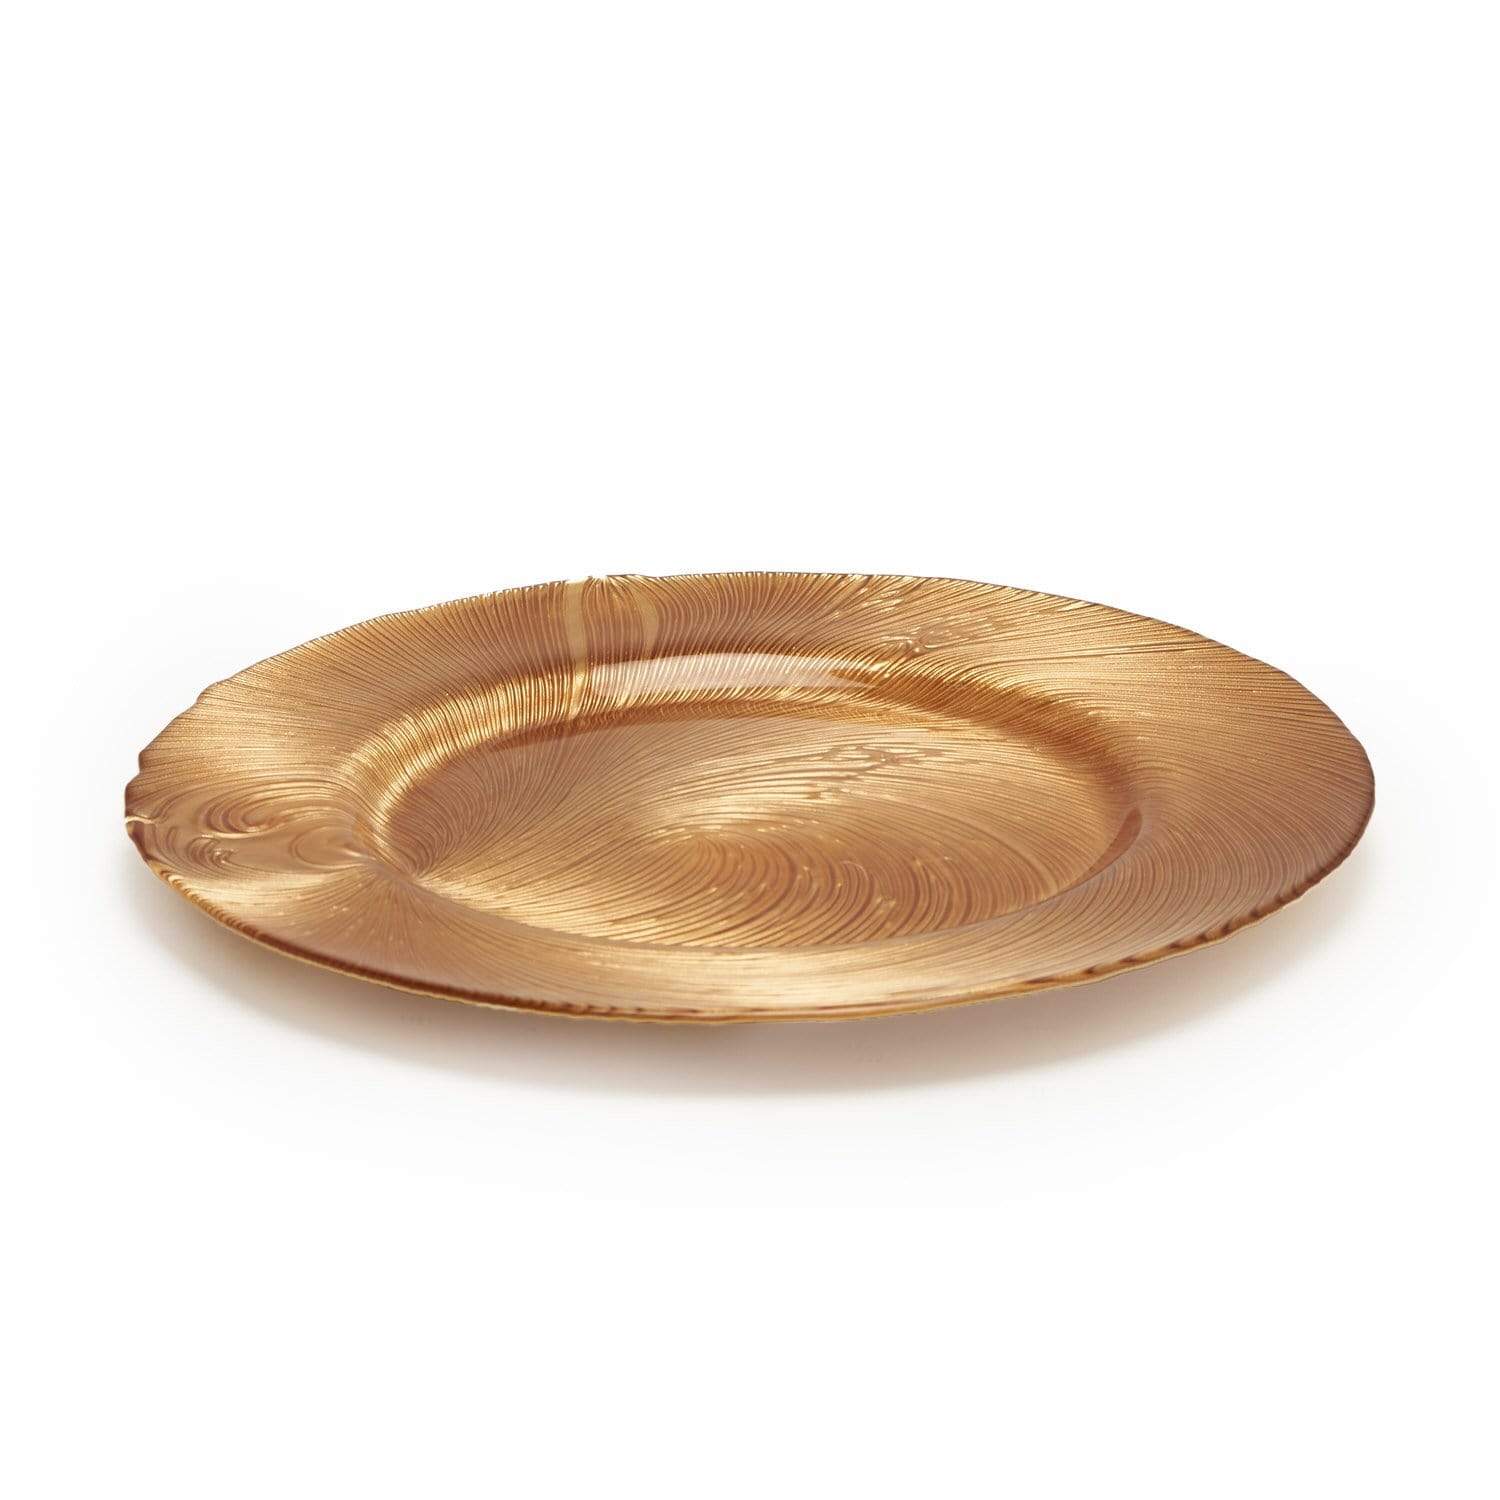 GLASS CHARGER PLATE 33CM GOLD PAINTED - 1Q953-006